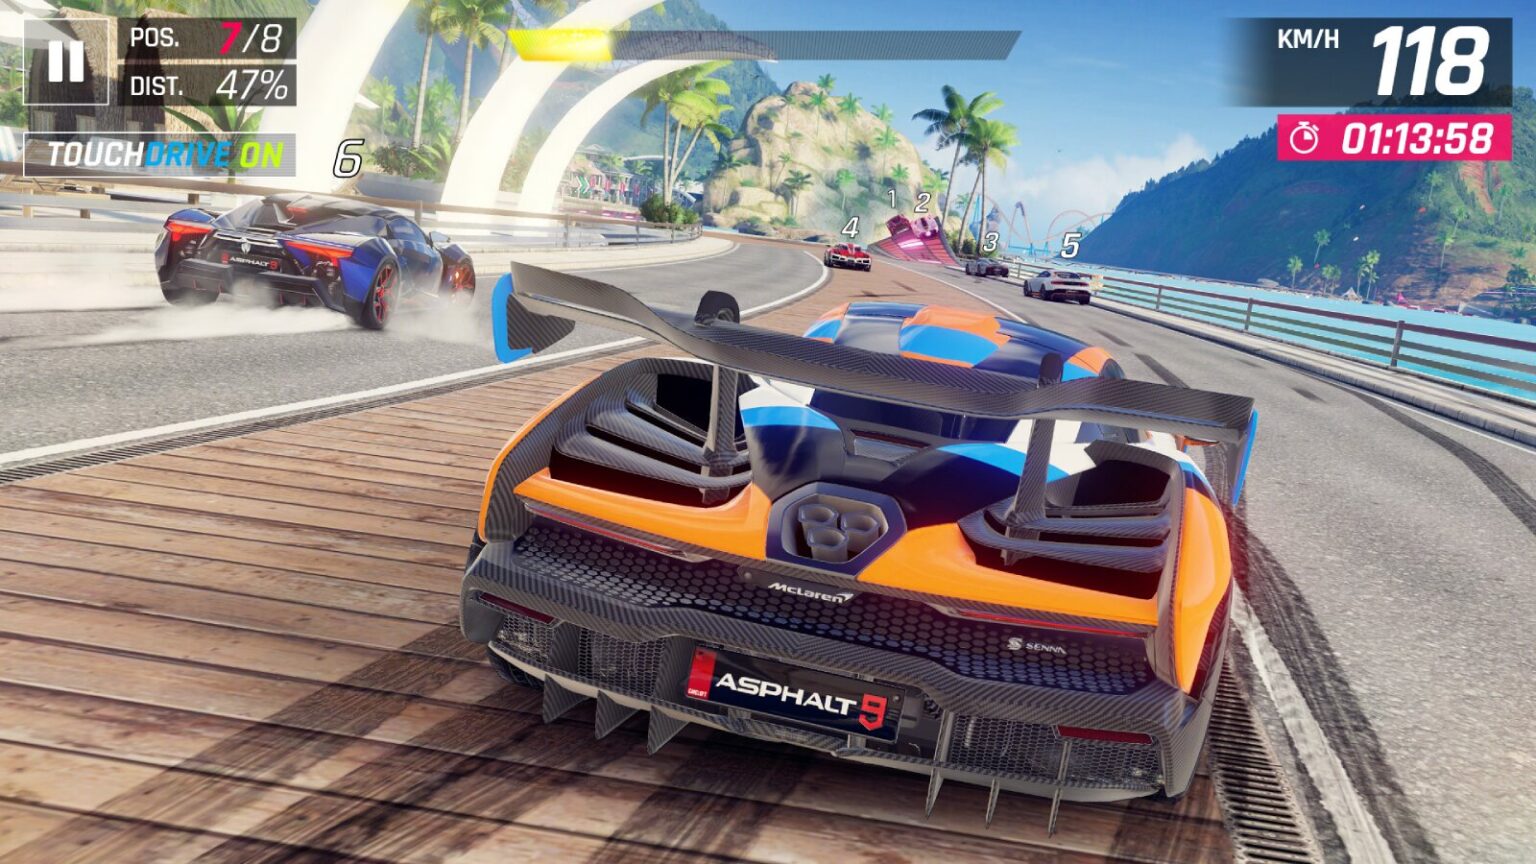 A high-speed race with flashy sports cars from a realistic mobile racing game